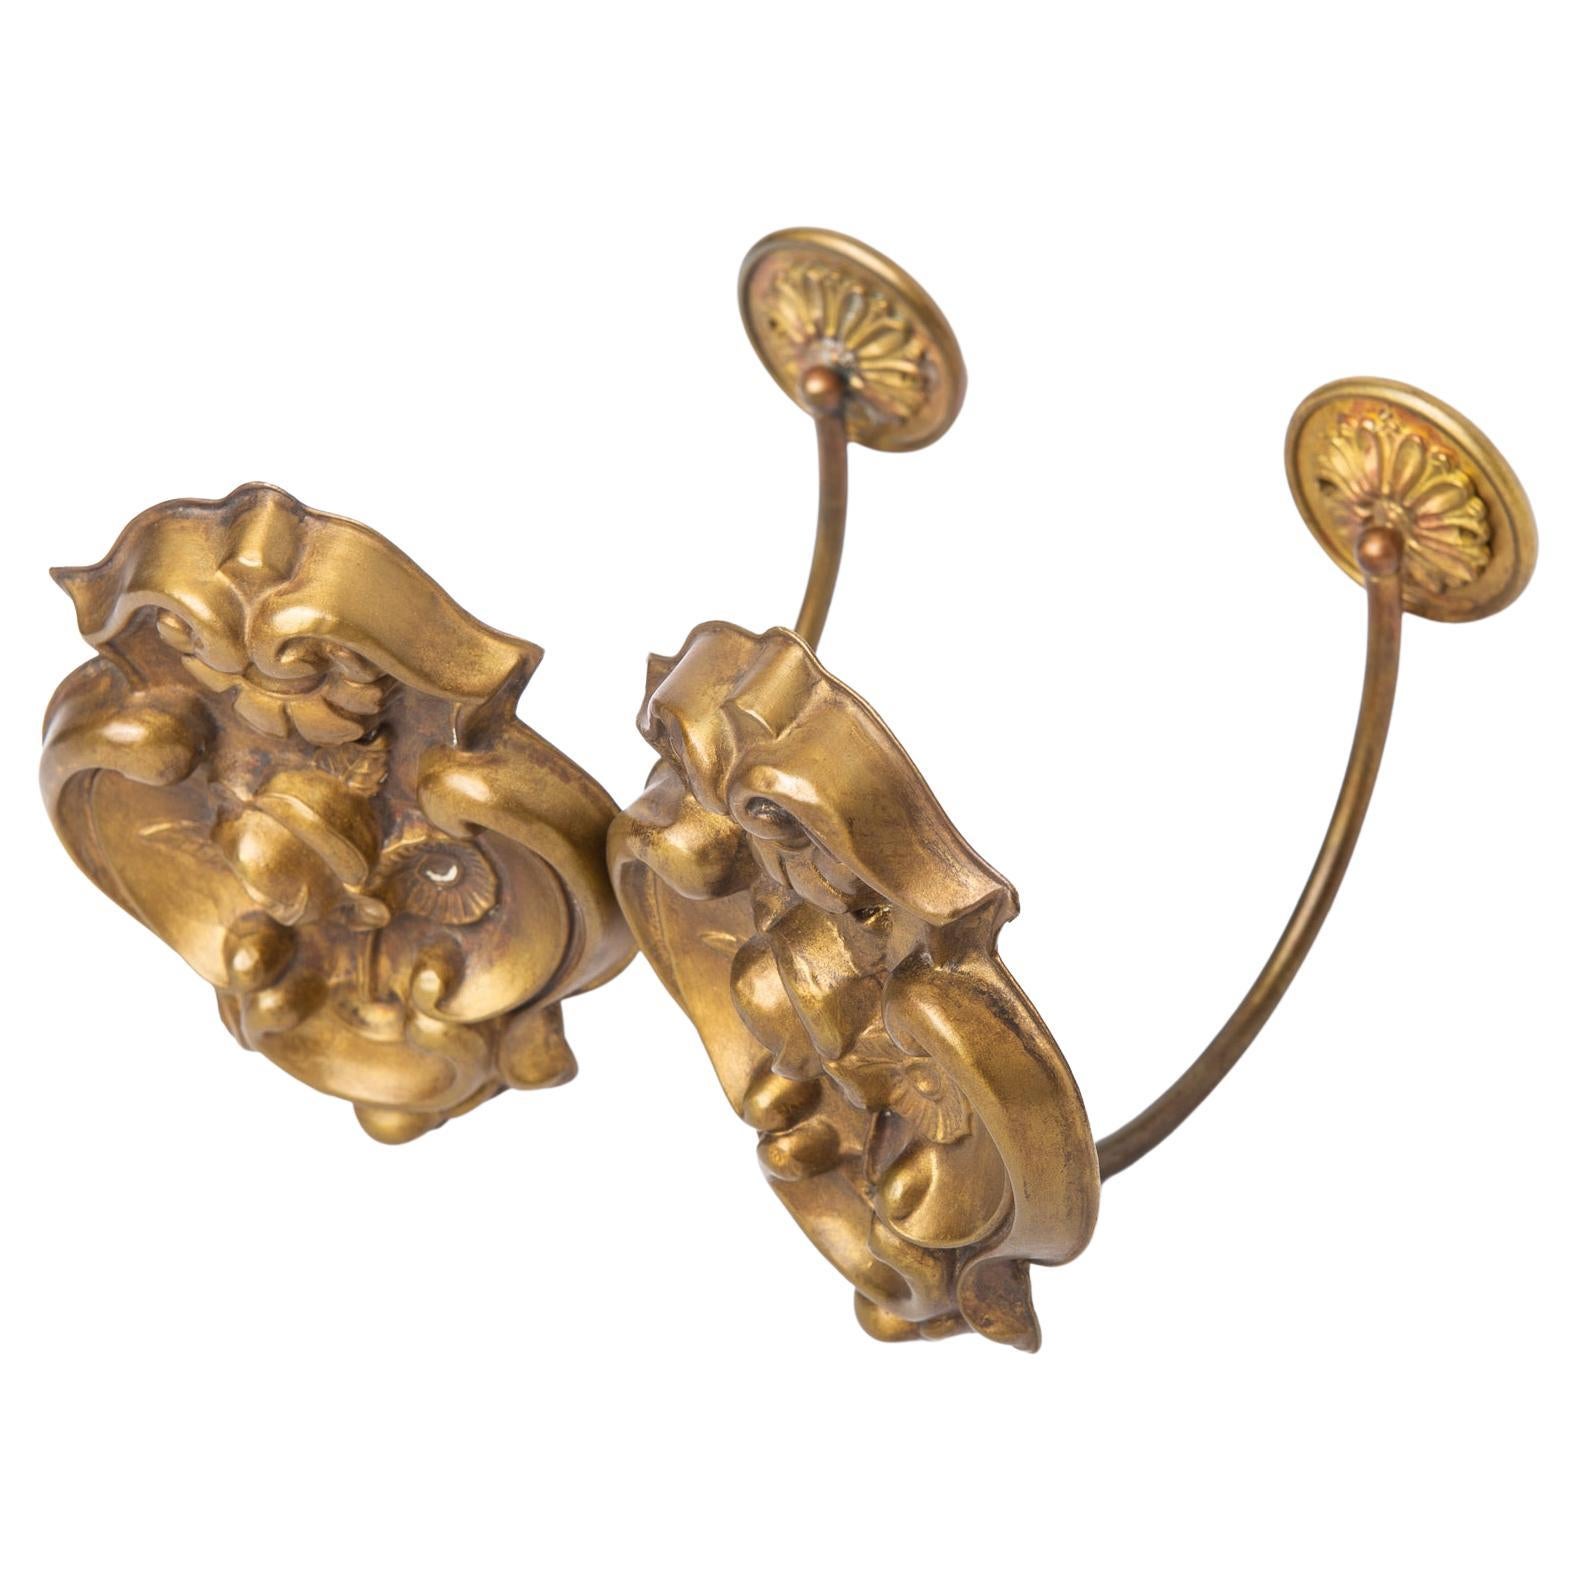 O/1664 - Antique French brass curtain holders, to enrich Your beautiful curtains.
Fixed to the wall, they hold the curtains in an elegant way.
